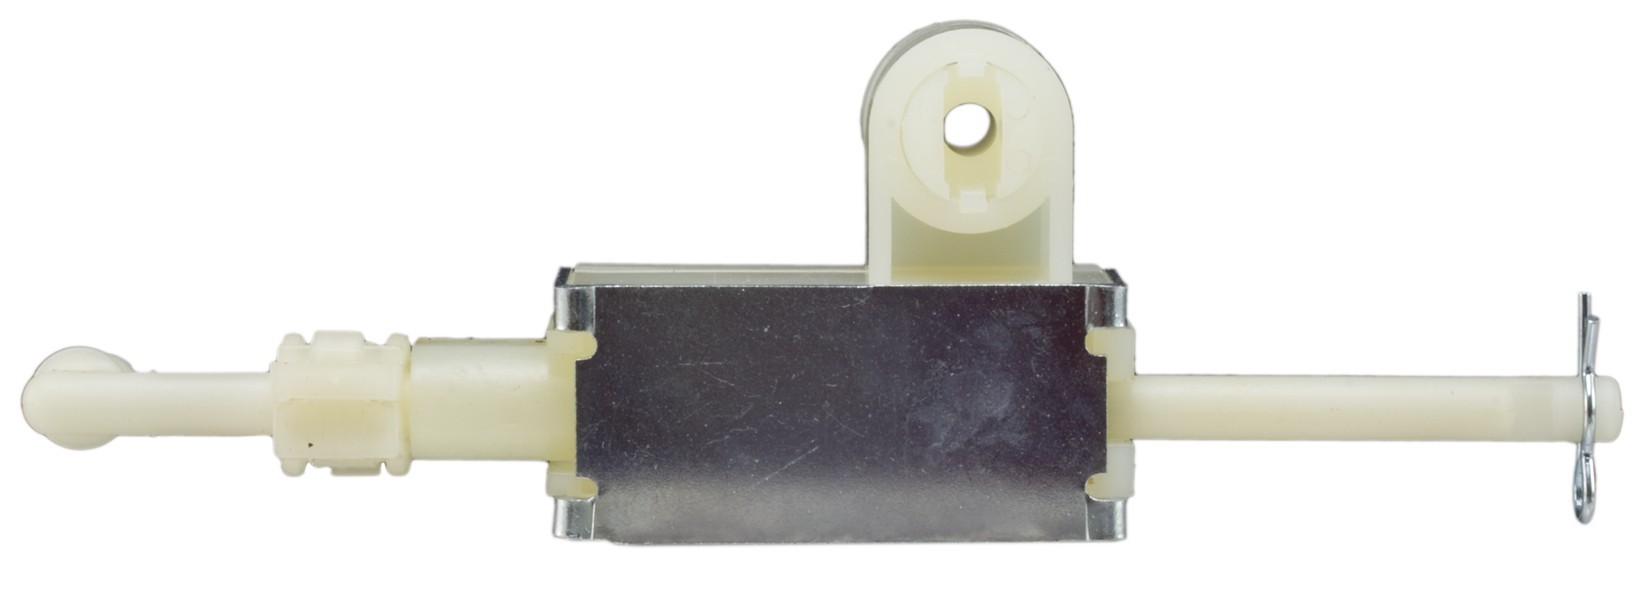 WELLS - Clutch Pedal Ignition Lock Switch - WEL DR4069